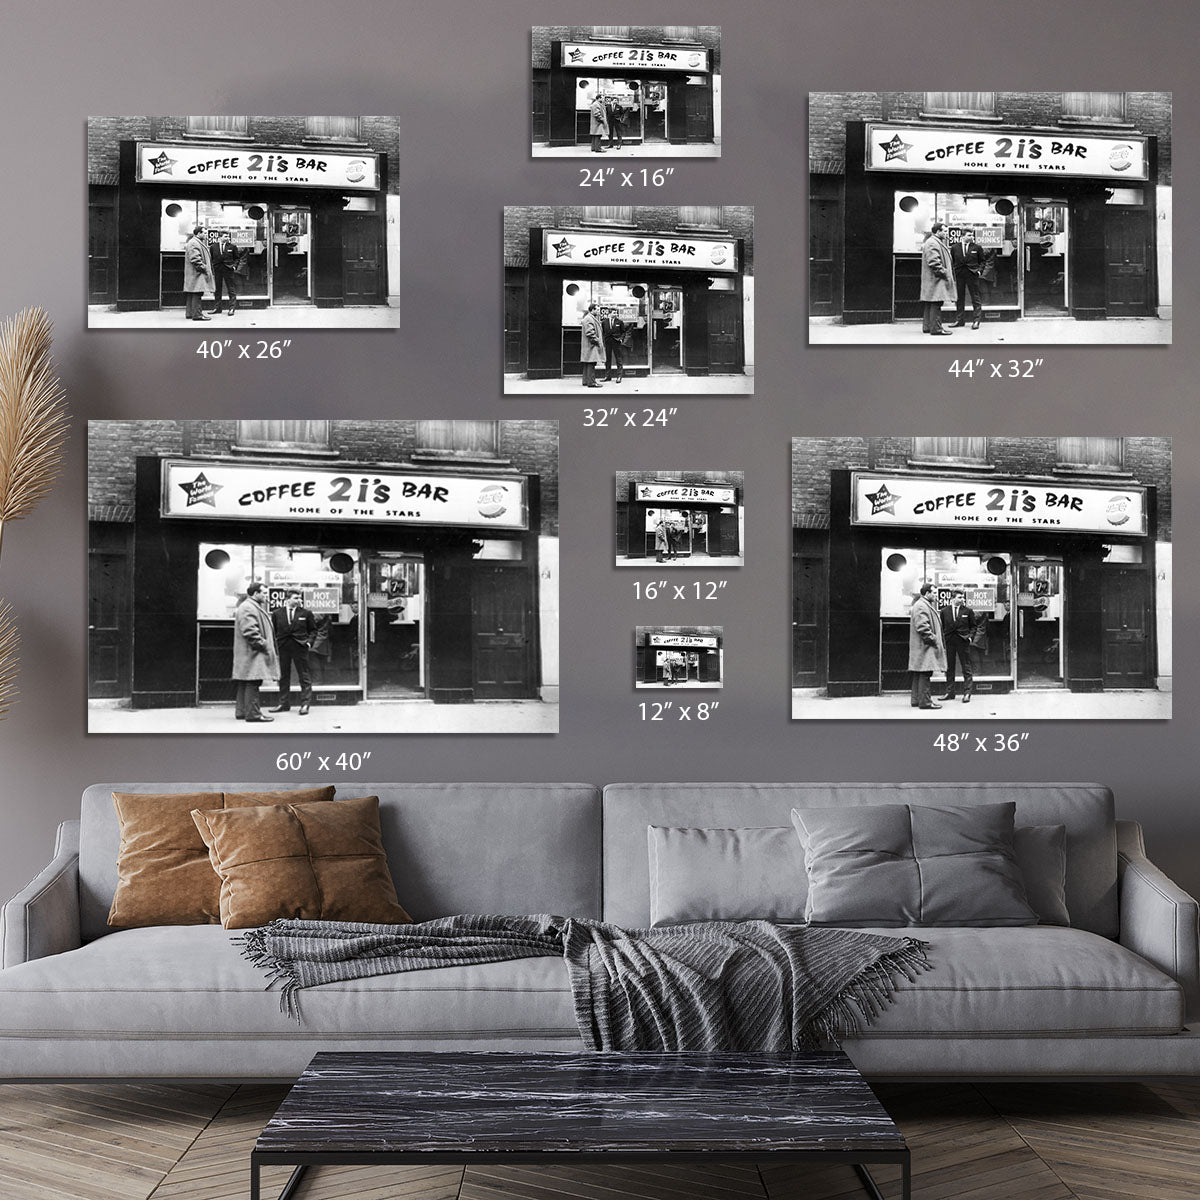 2is Coffee Bar in Old Compton Street Soho 1963 Canvas Print or Poster - Canvas Art Rocks - 7